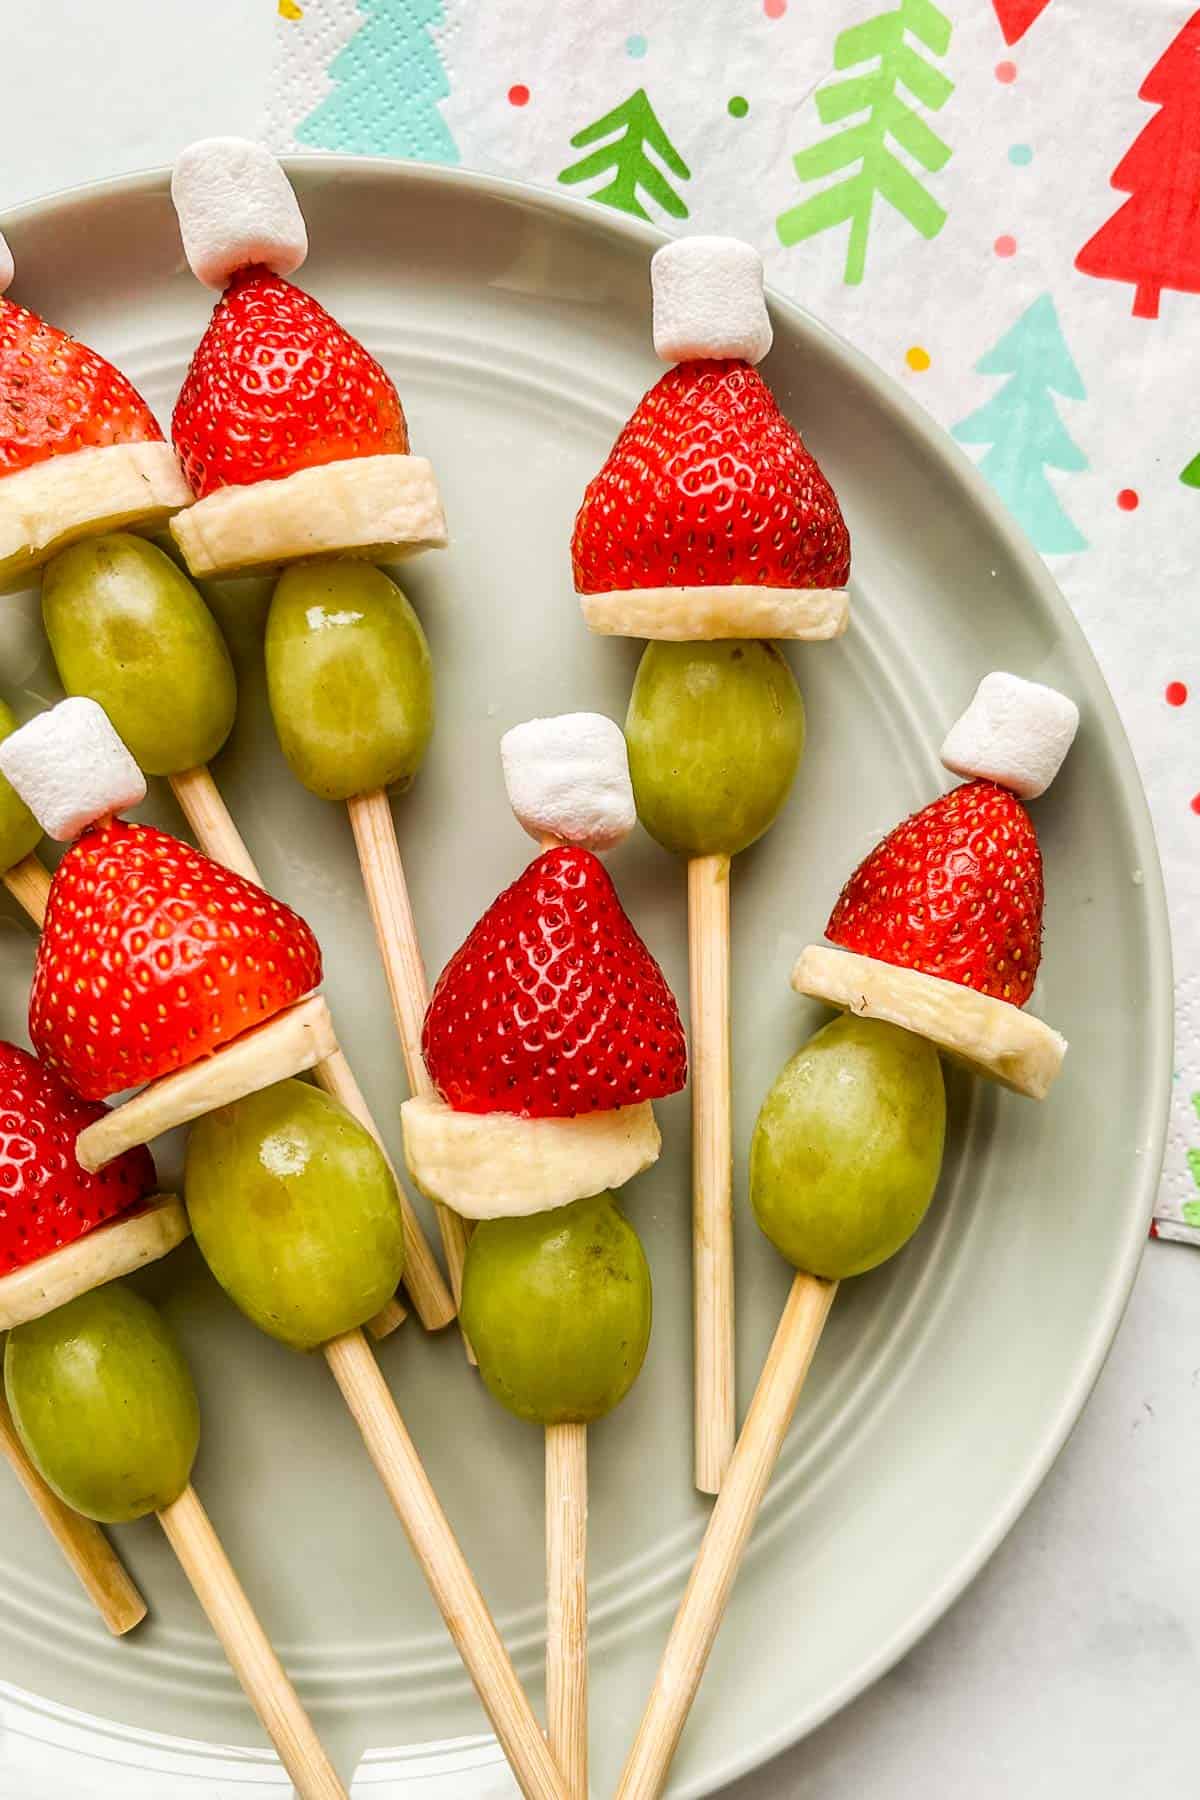 Grinch fruit skewers on a light green plate.